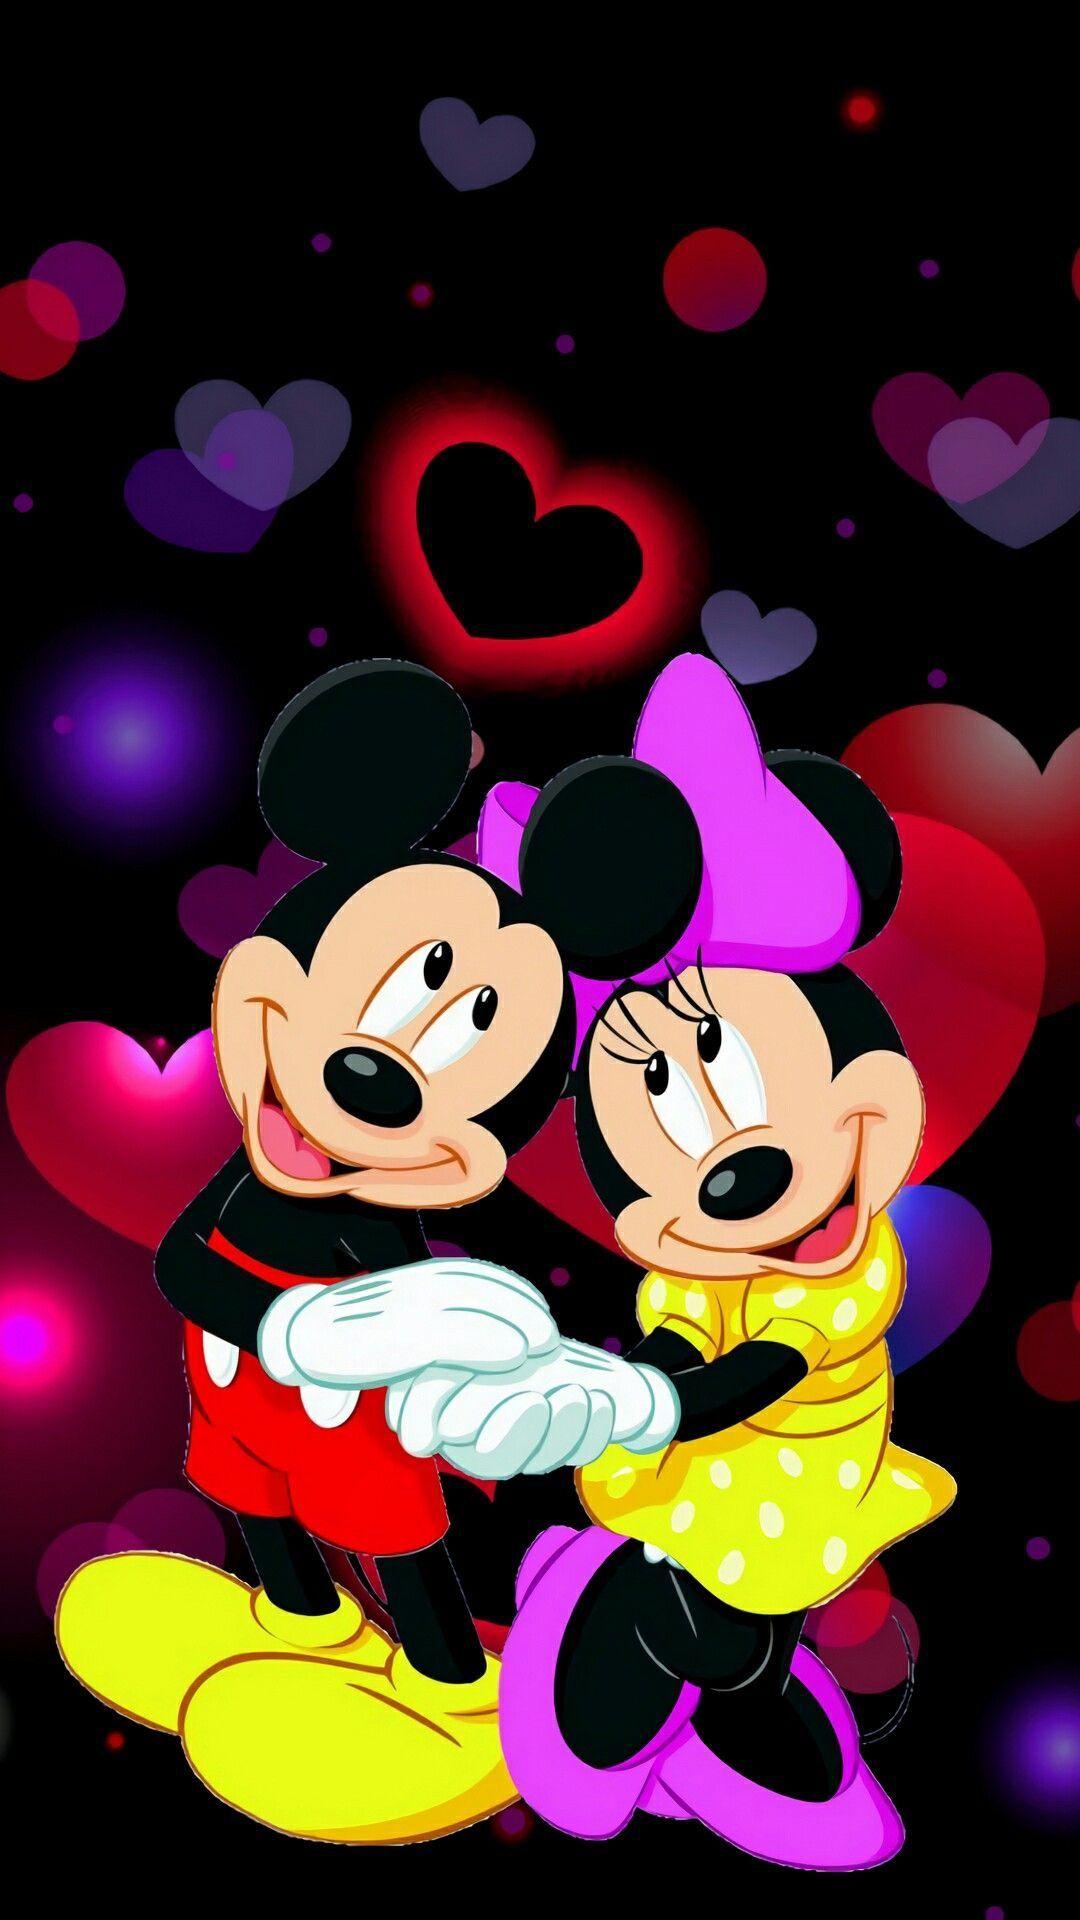 Minnie Mouse Wallpaper  Mickey mouse art Minnie mouse images Disney  wallpaper